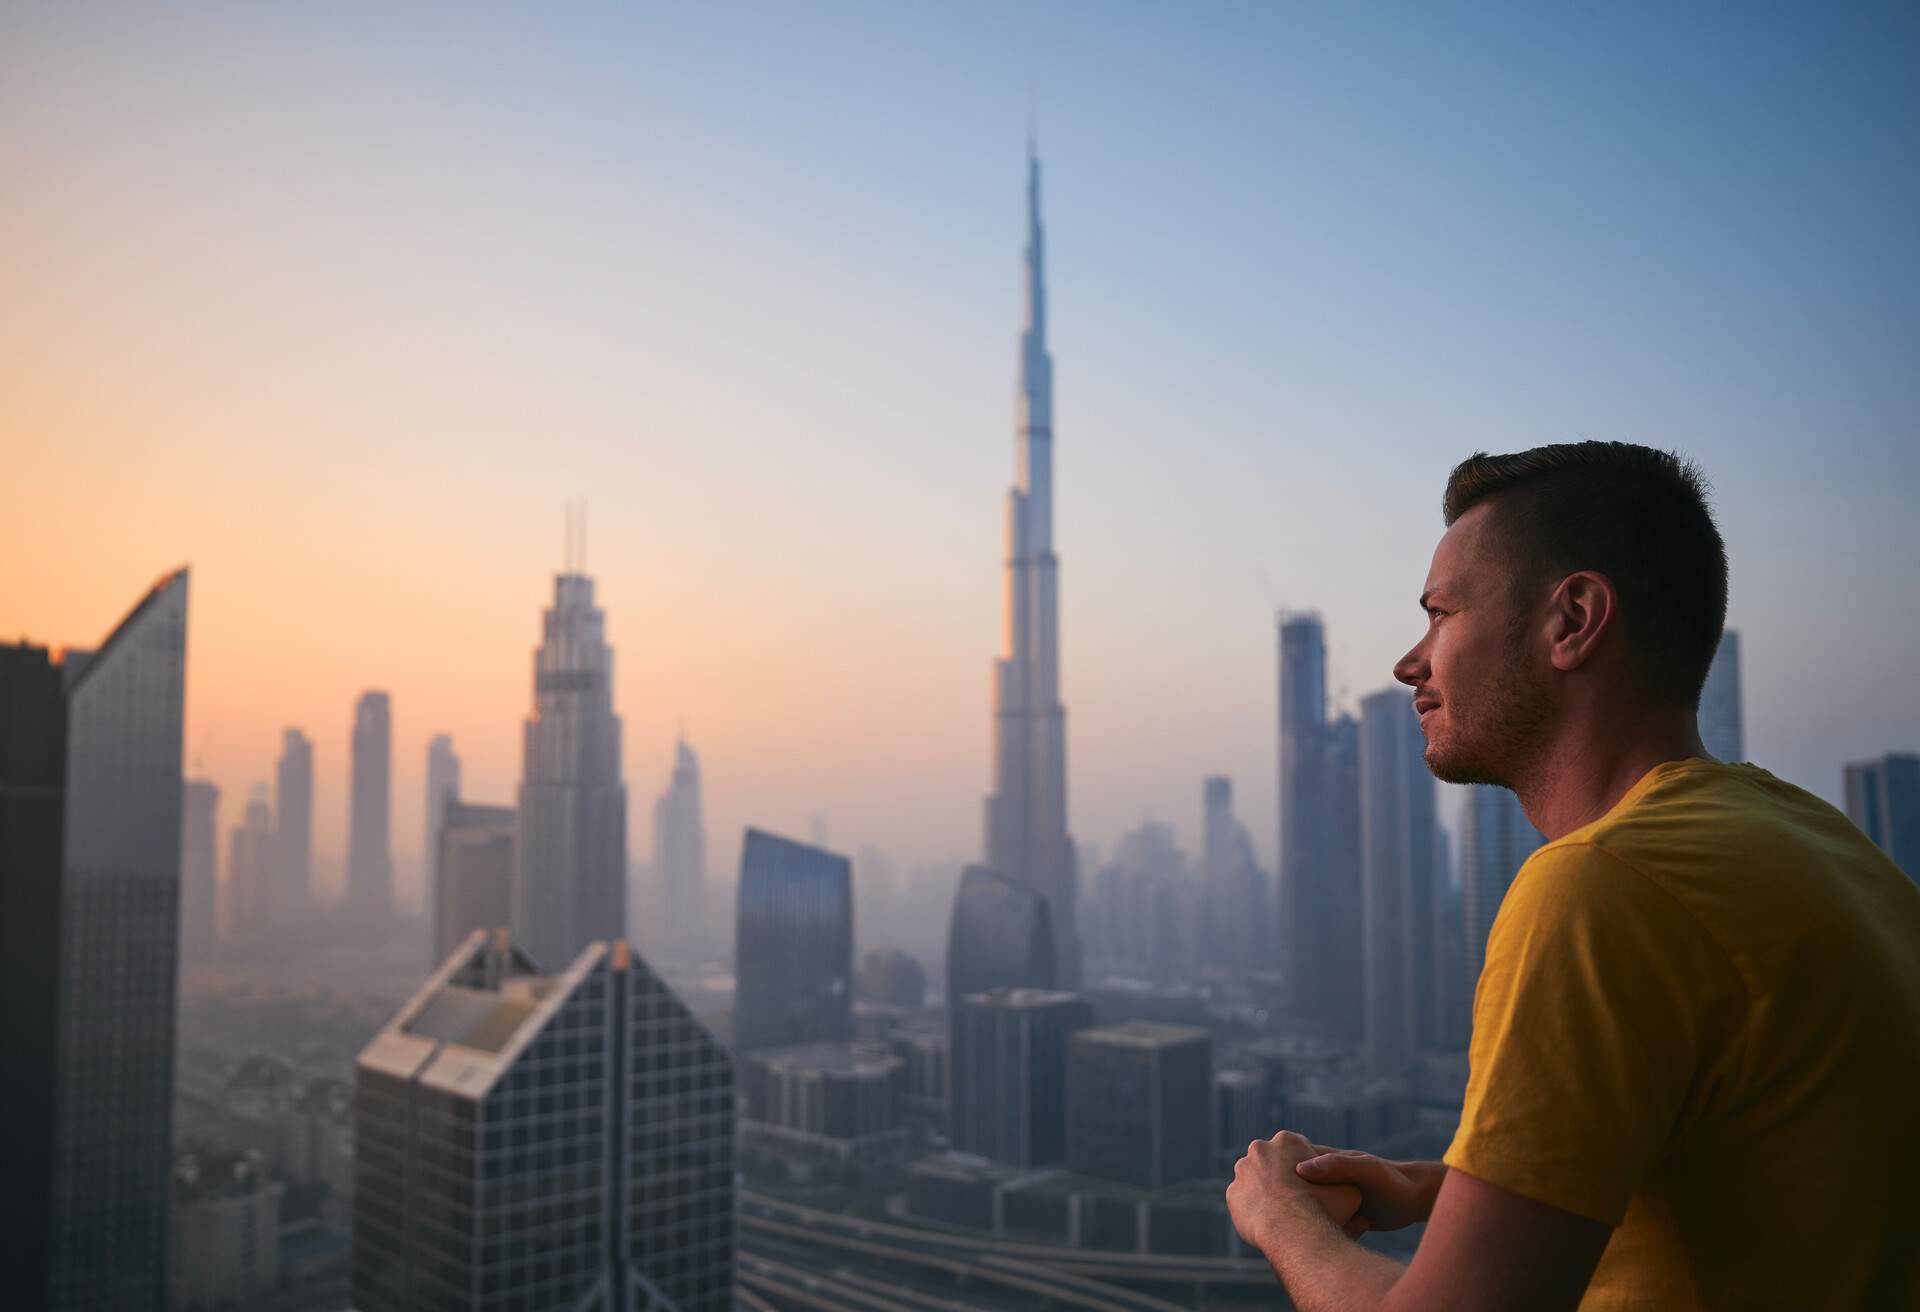 A man on a terrace looks at a city skyline with skyscrapers on a foggy morning.